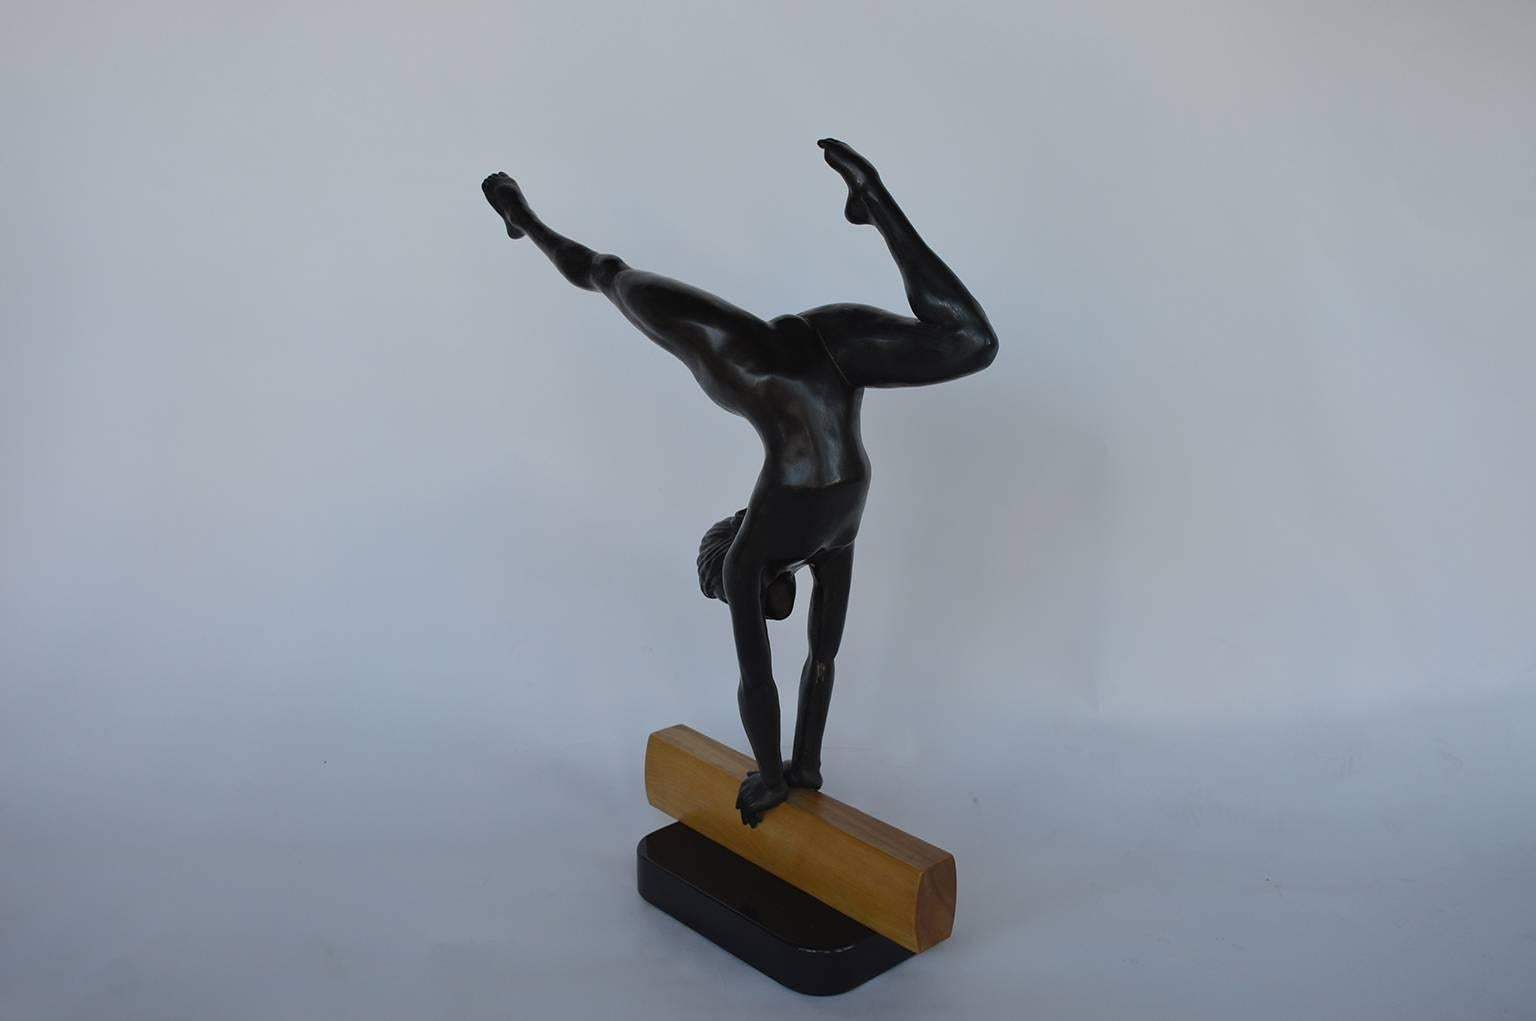 Art Deco bronze beam gymnast sculpture. Base is marble, the beam is wood and the gymnast is bronze.